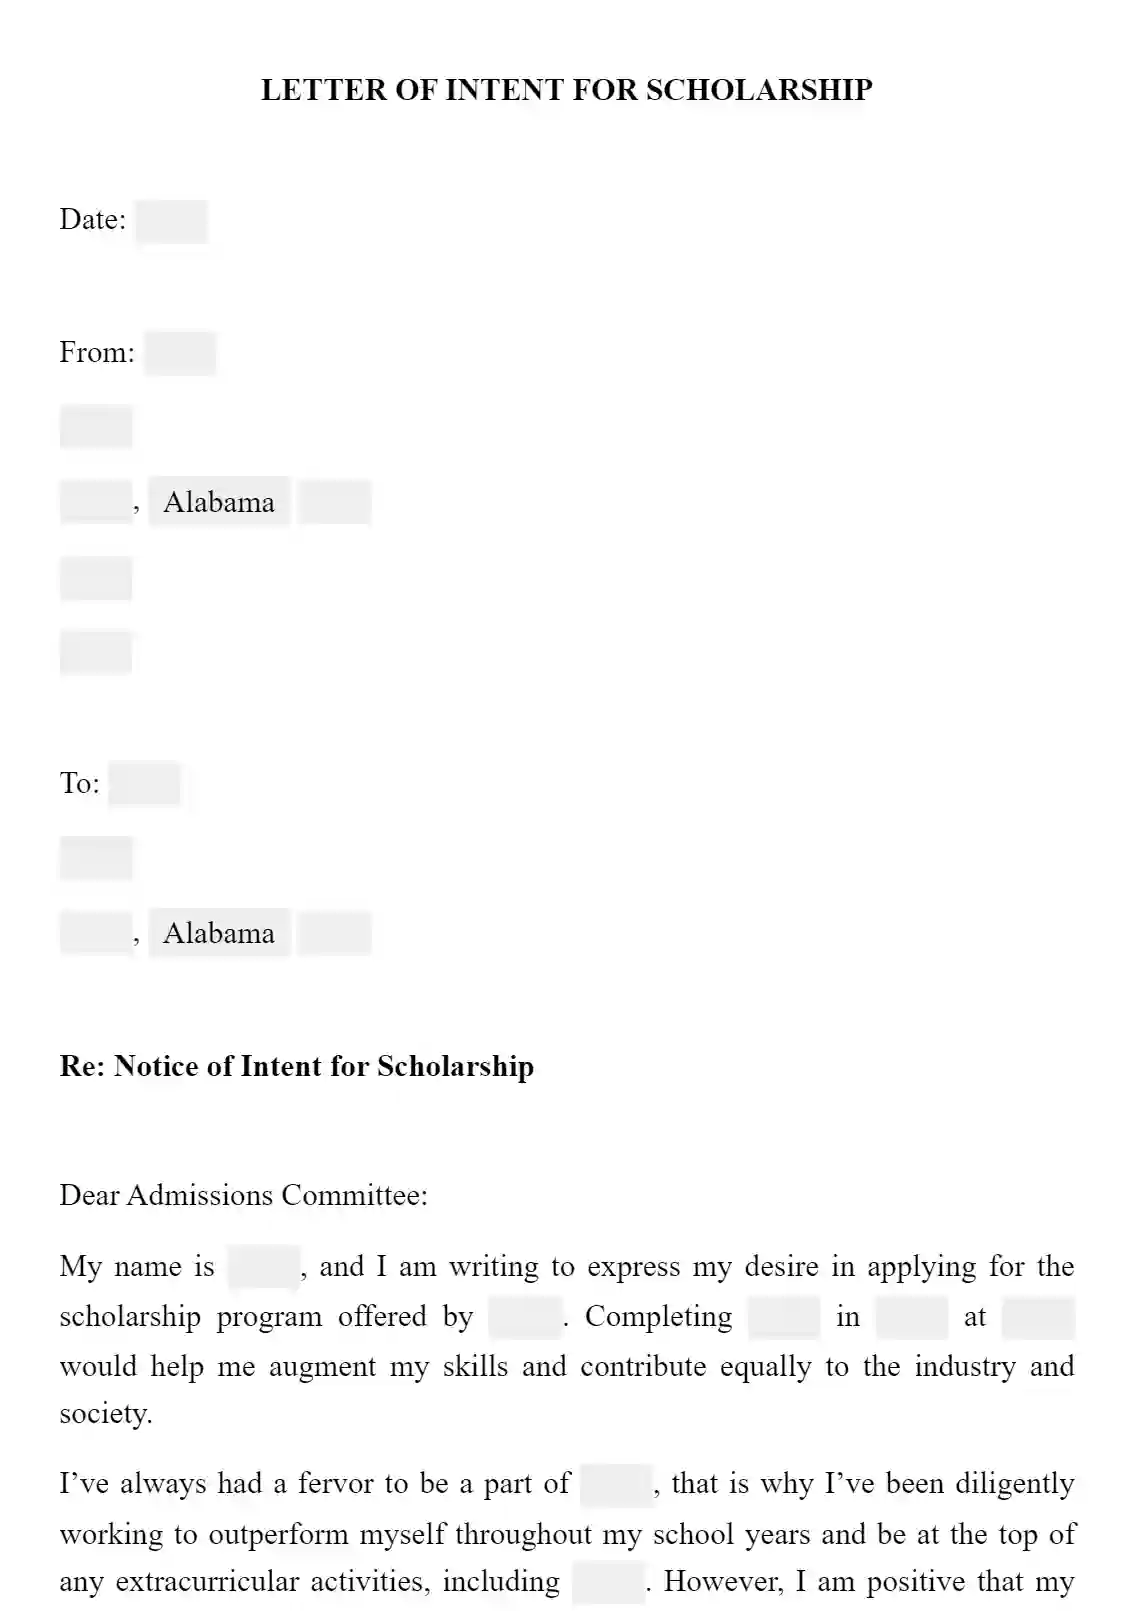 letter-of-intent-for-scholarship